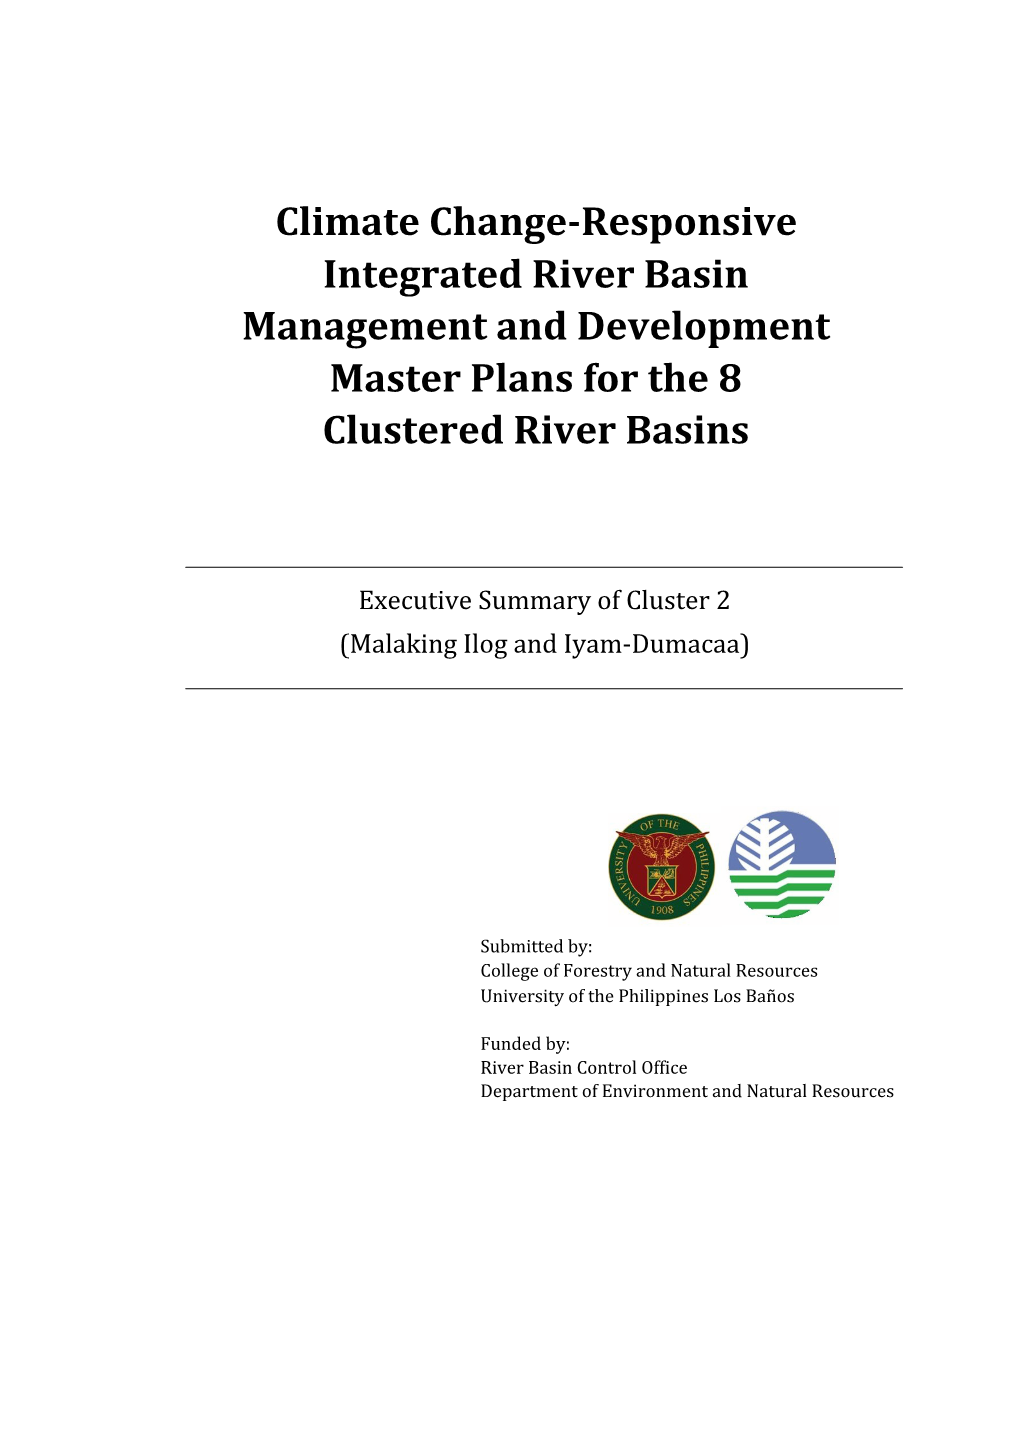 Climate Change-Responsive Integrated River Basin Management and Development Master Plans for the 8 Clustered River Basins